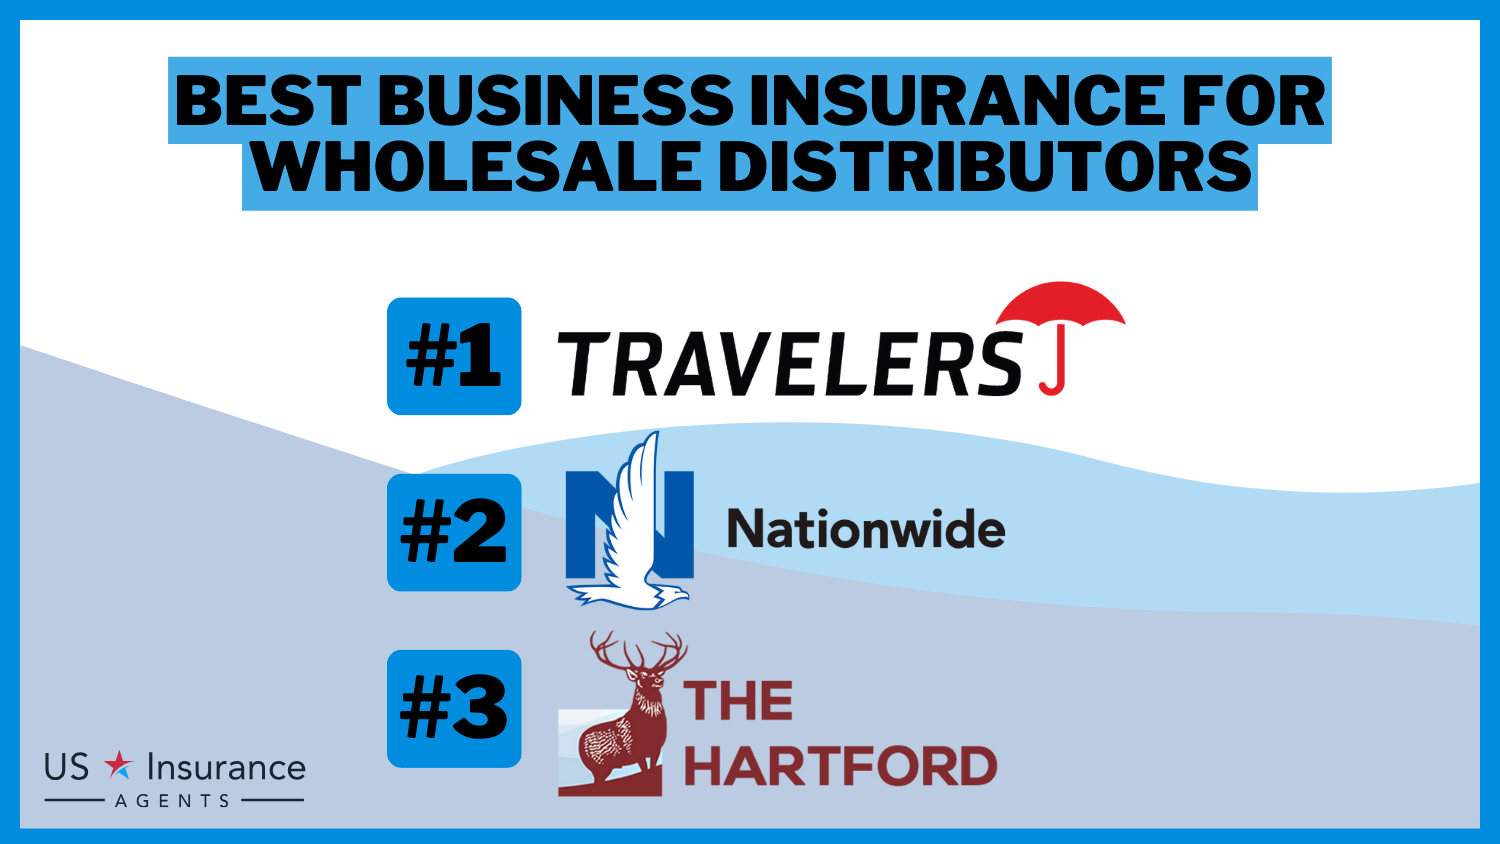 3 Best Business Insurance for Wholesale Distributors: Travelers, Nationwide, and The Hartford